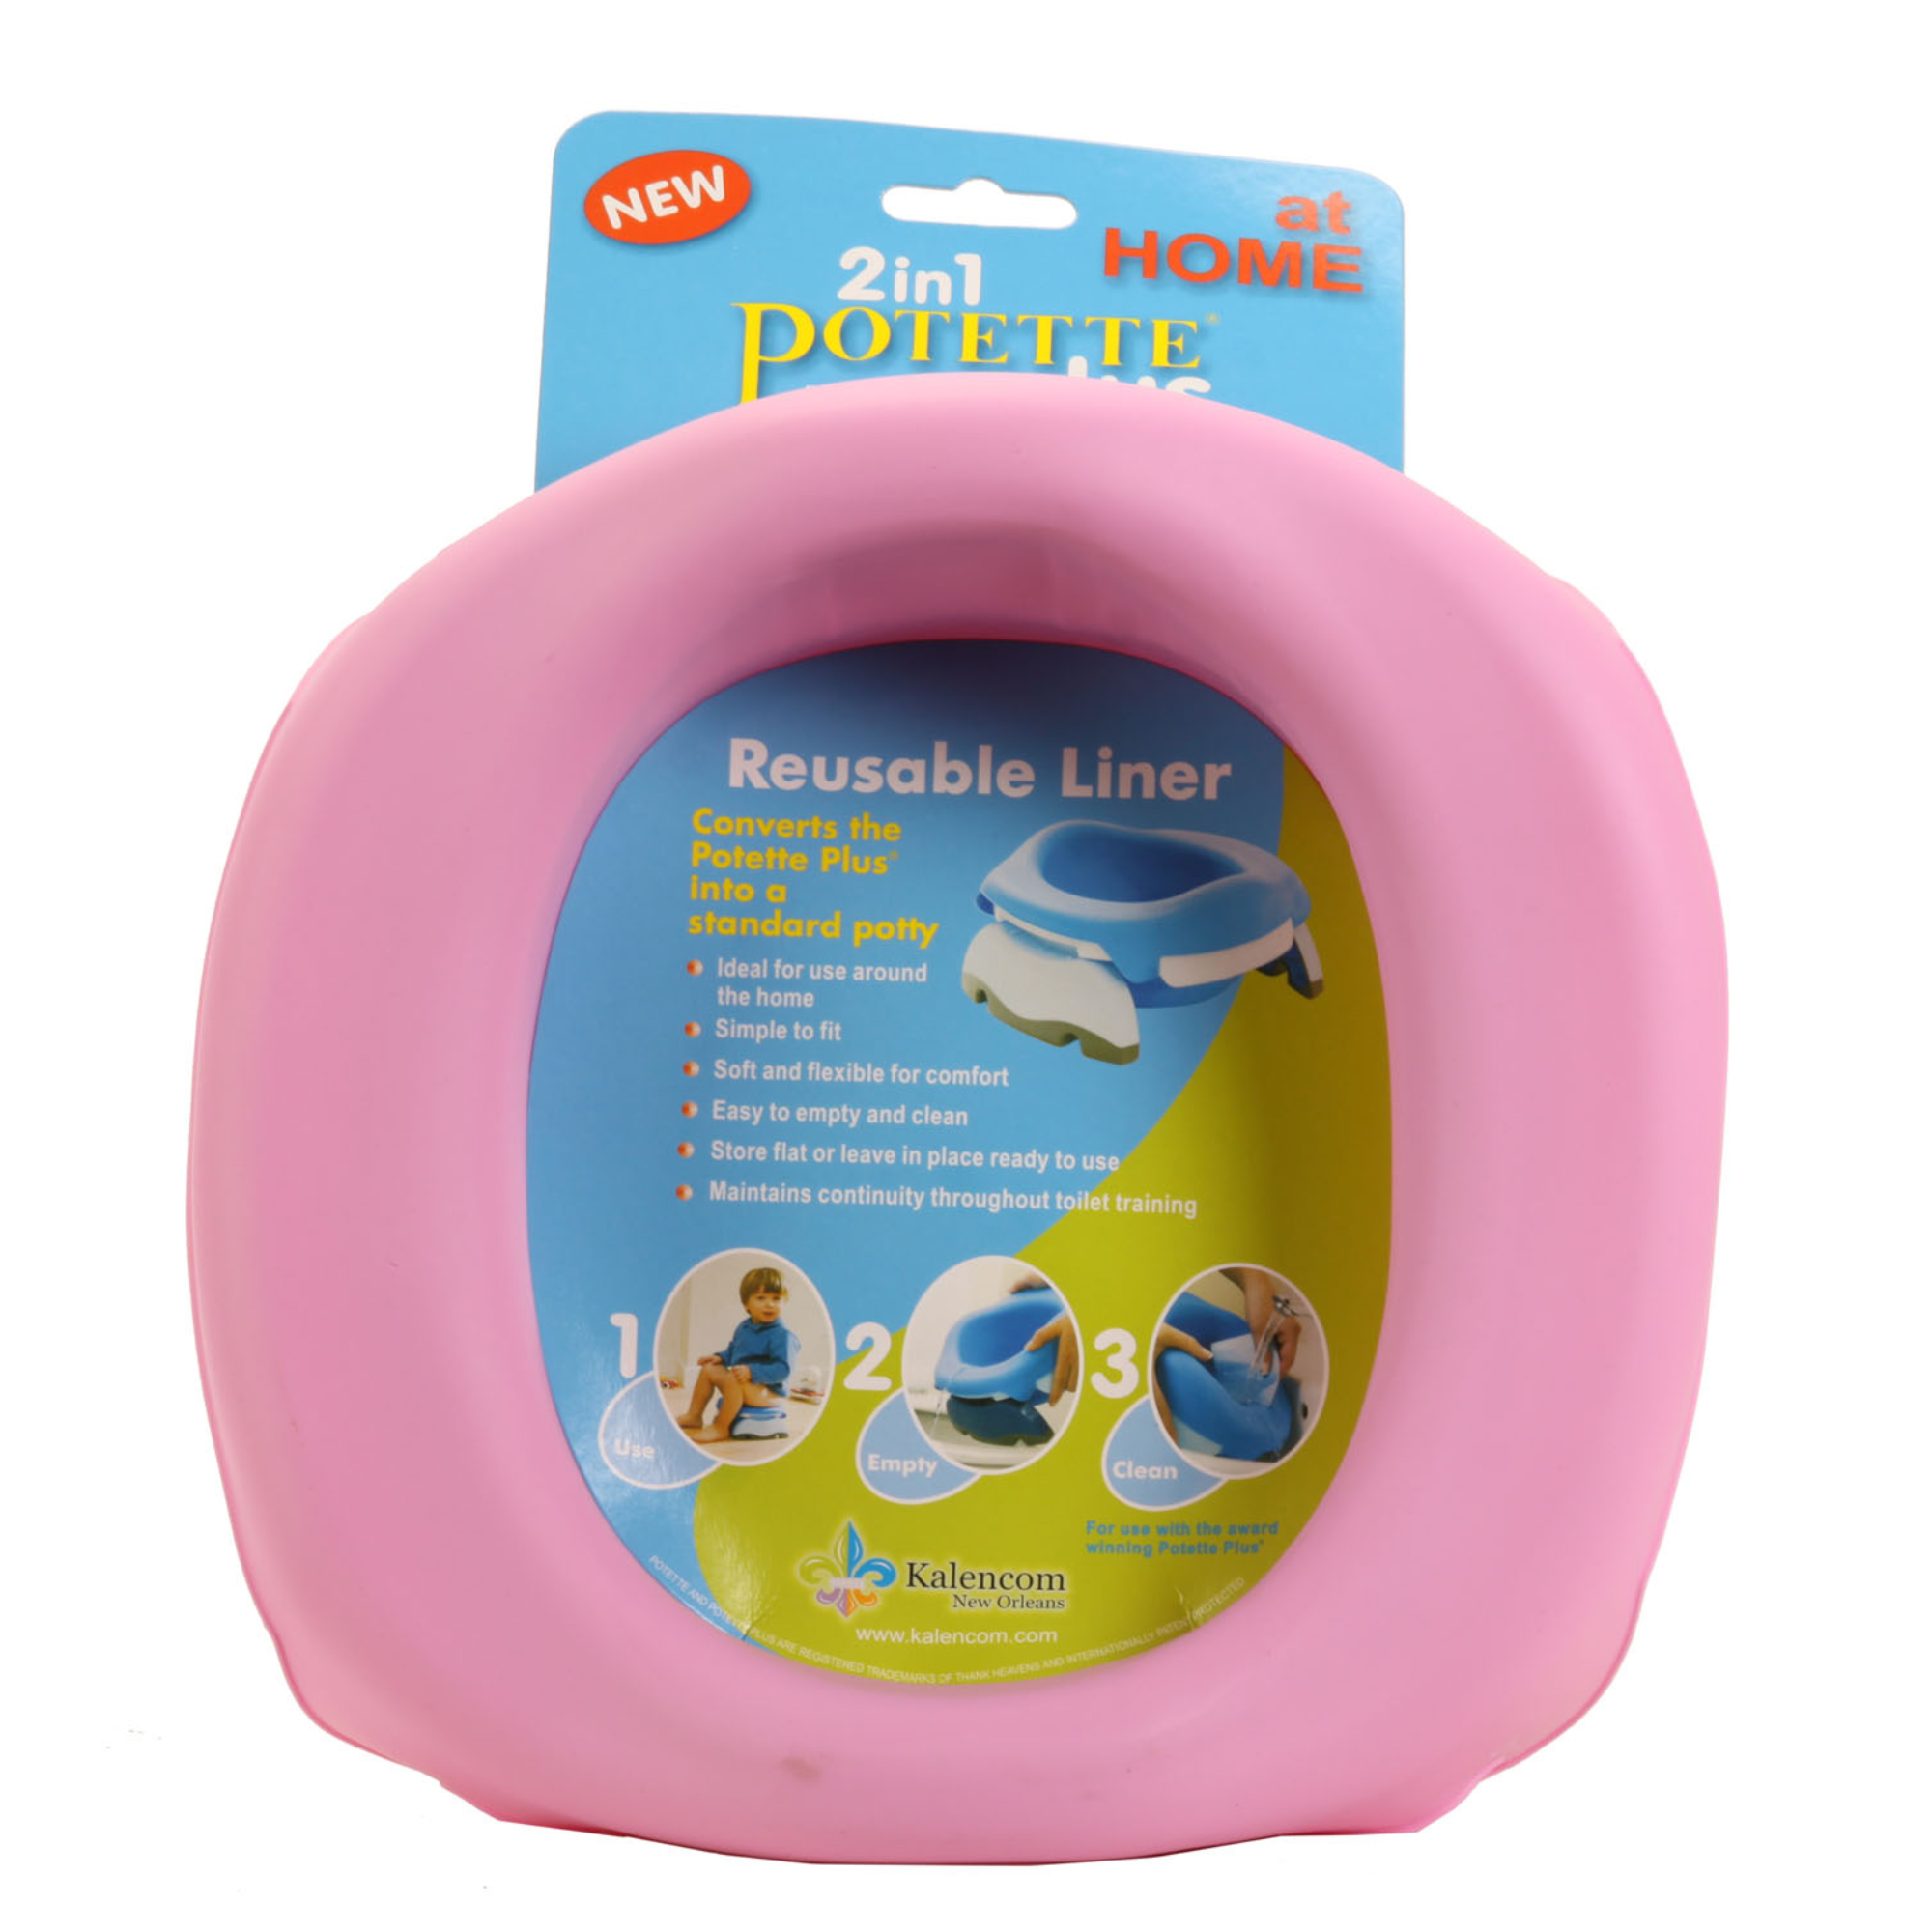 Pink Reusable Collapsible Travel Potty Liner Sold Separately Kalencom Potette Plus Potty Liner for Home Use with The 2-in-1 Potette Plus Potty 